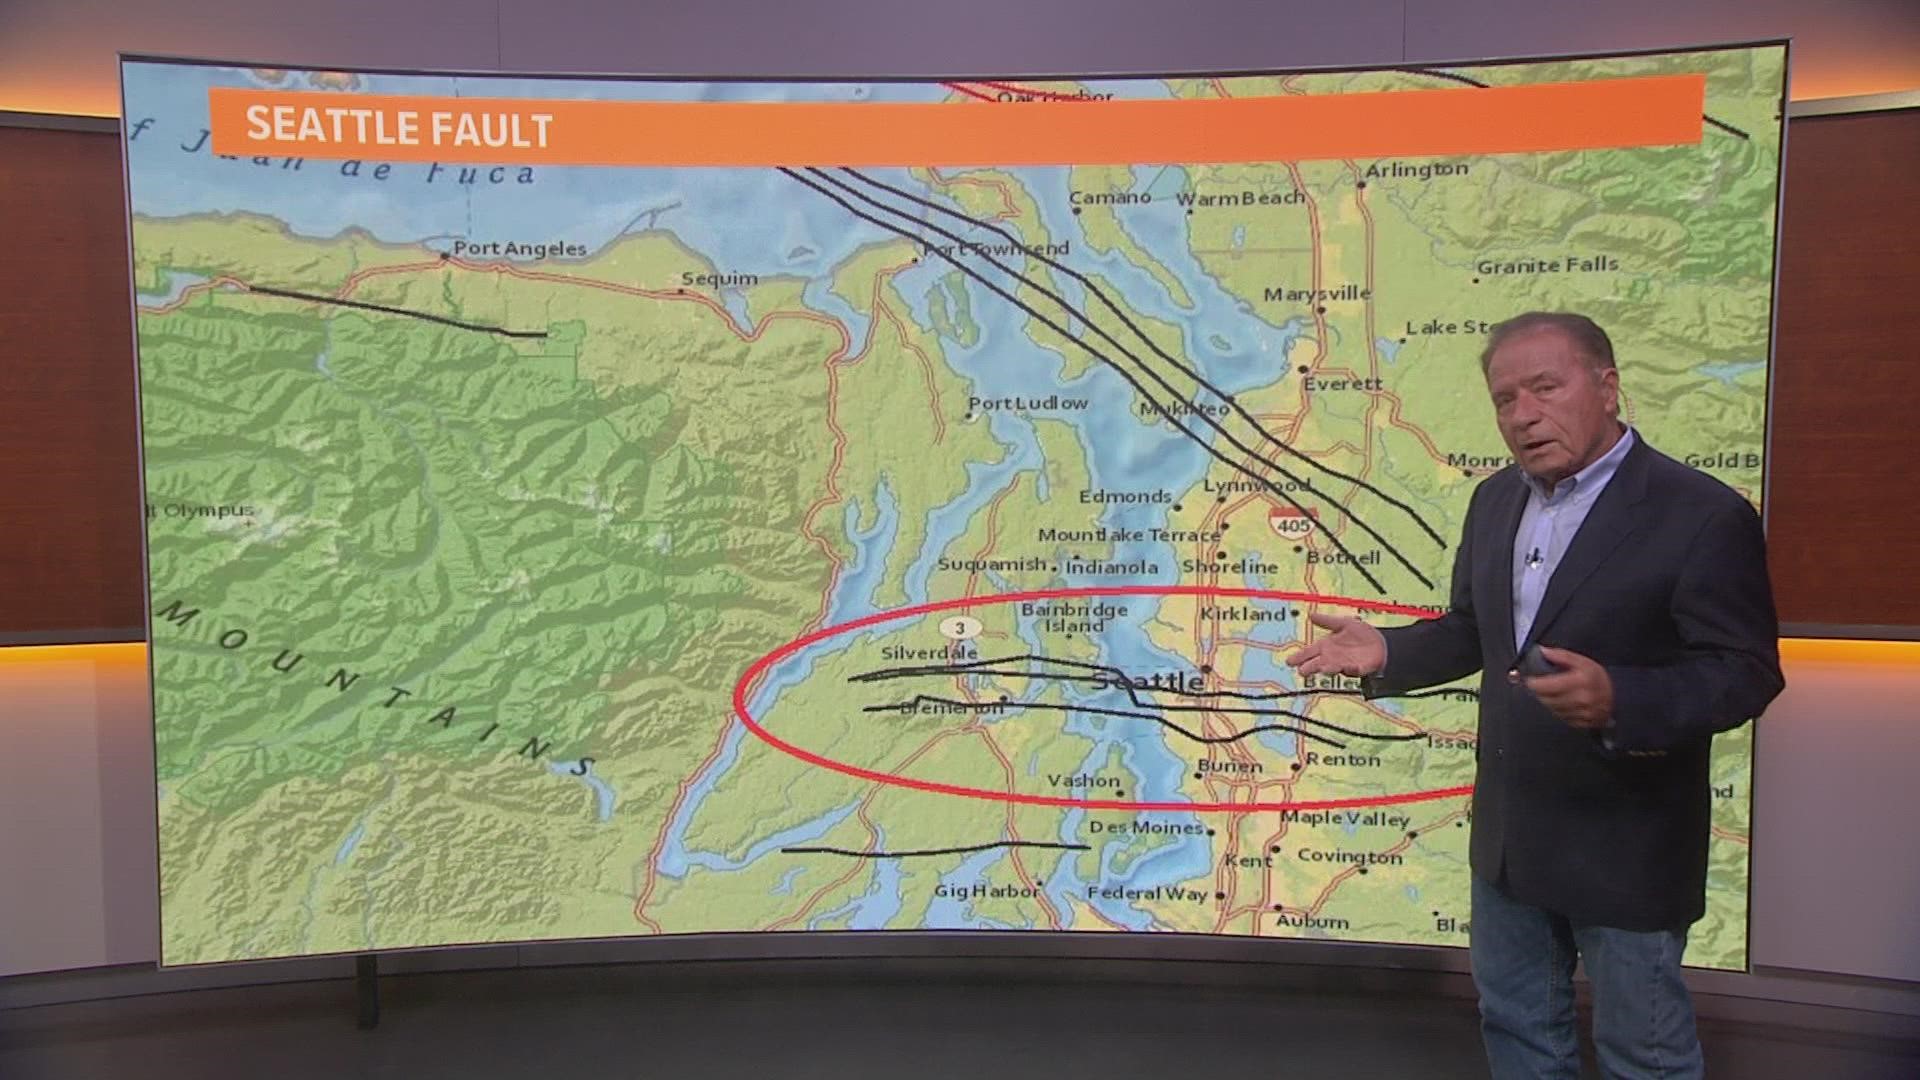 Meteorologist Rich Marriot explains where the Seattle Fault is located after the DNR released a report showing the possible impacts of a magnitude 7.5 earthquake.